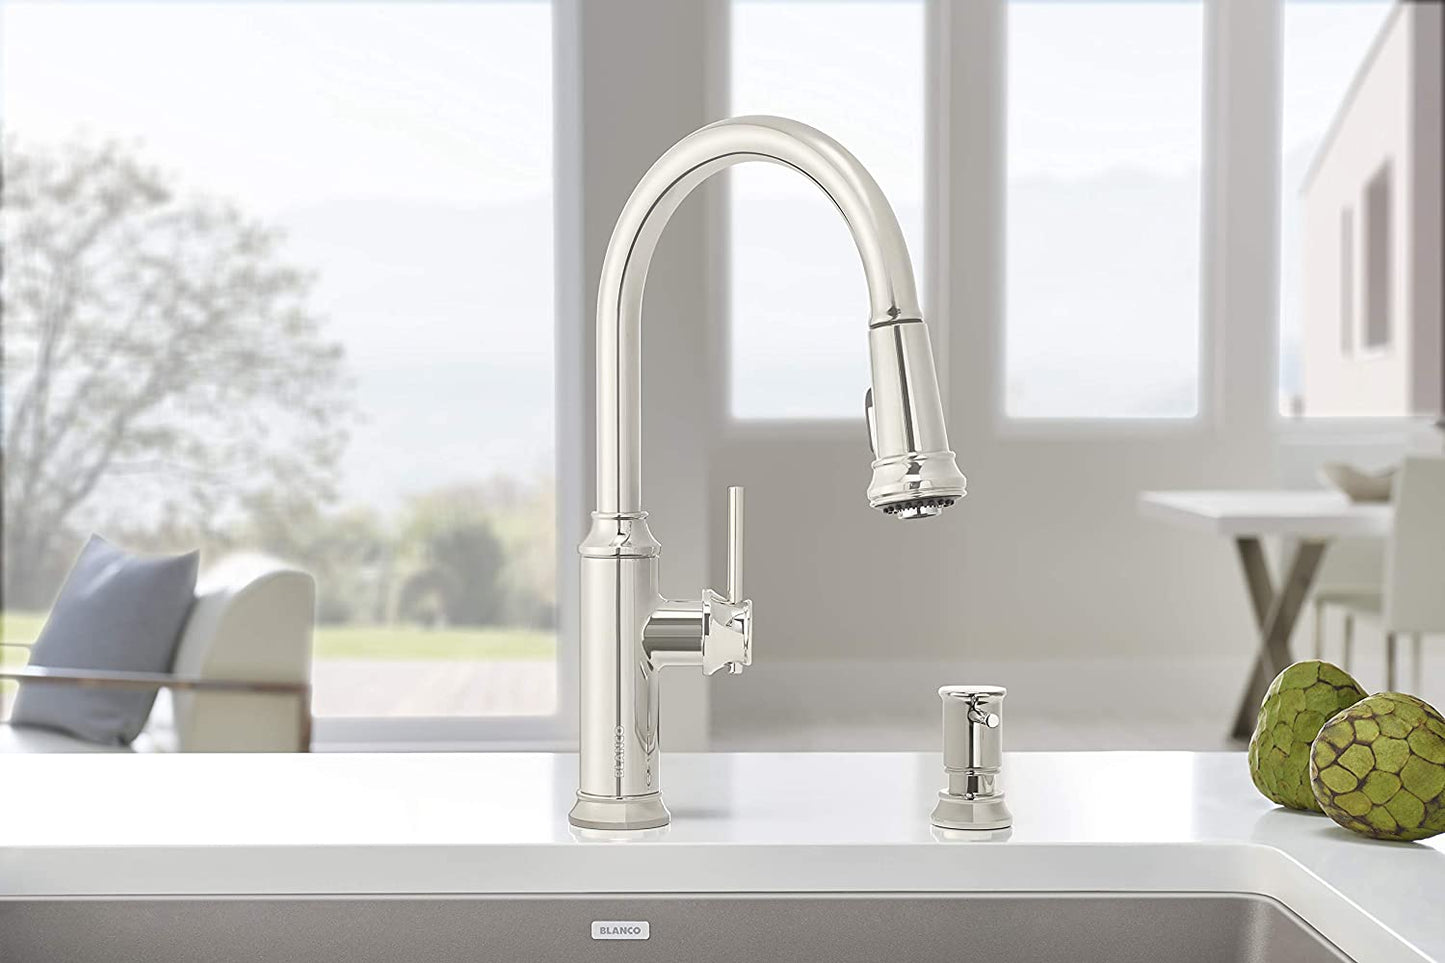 Blanco 442502 Empressa 1.5 GPM High Arc Pull-Down Dual Spray Kitchen Faucet in Polished Nickel